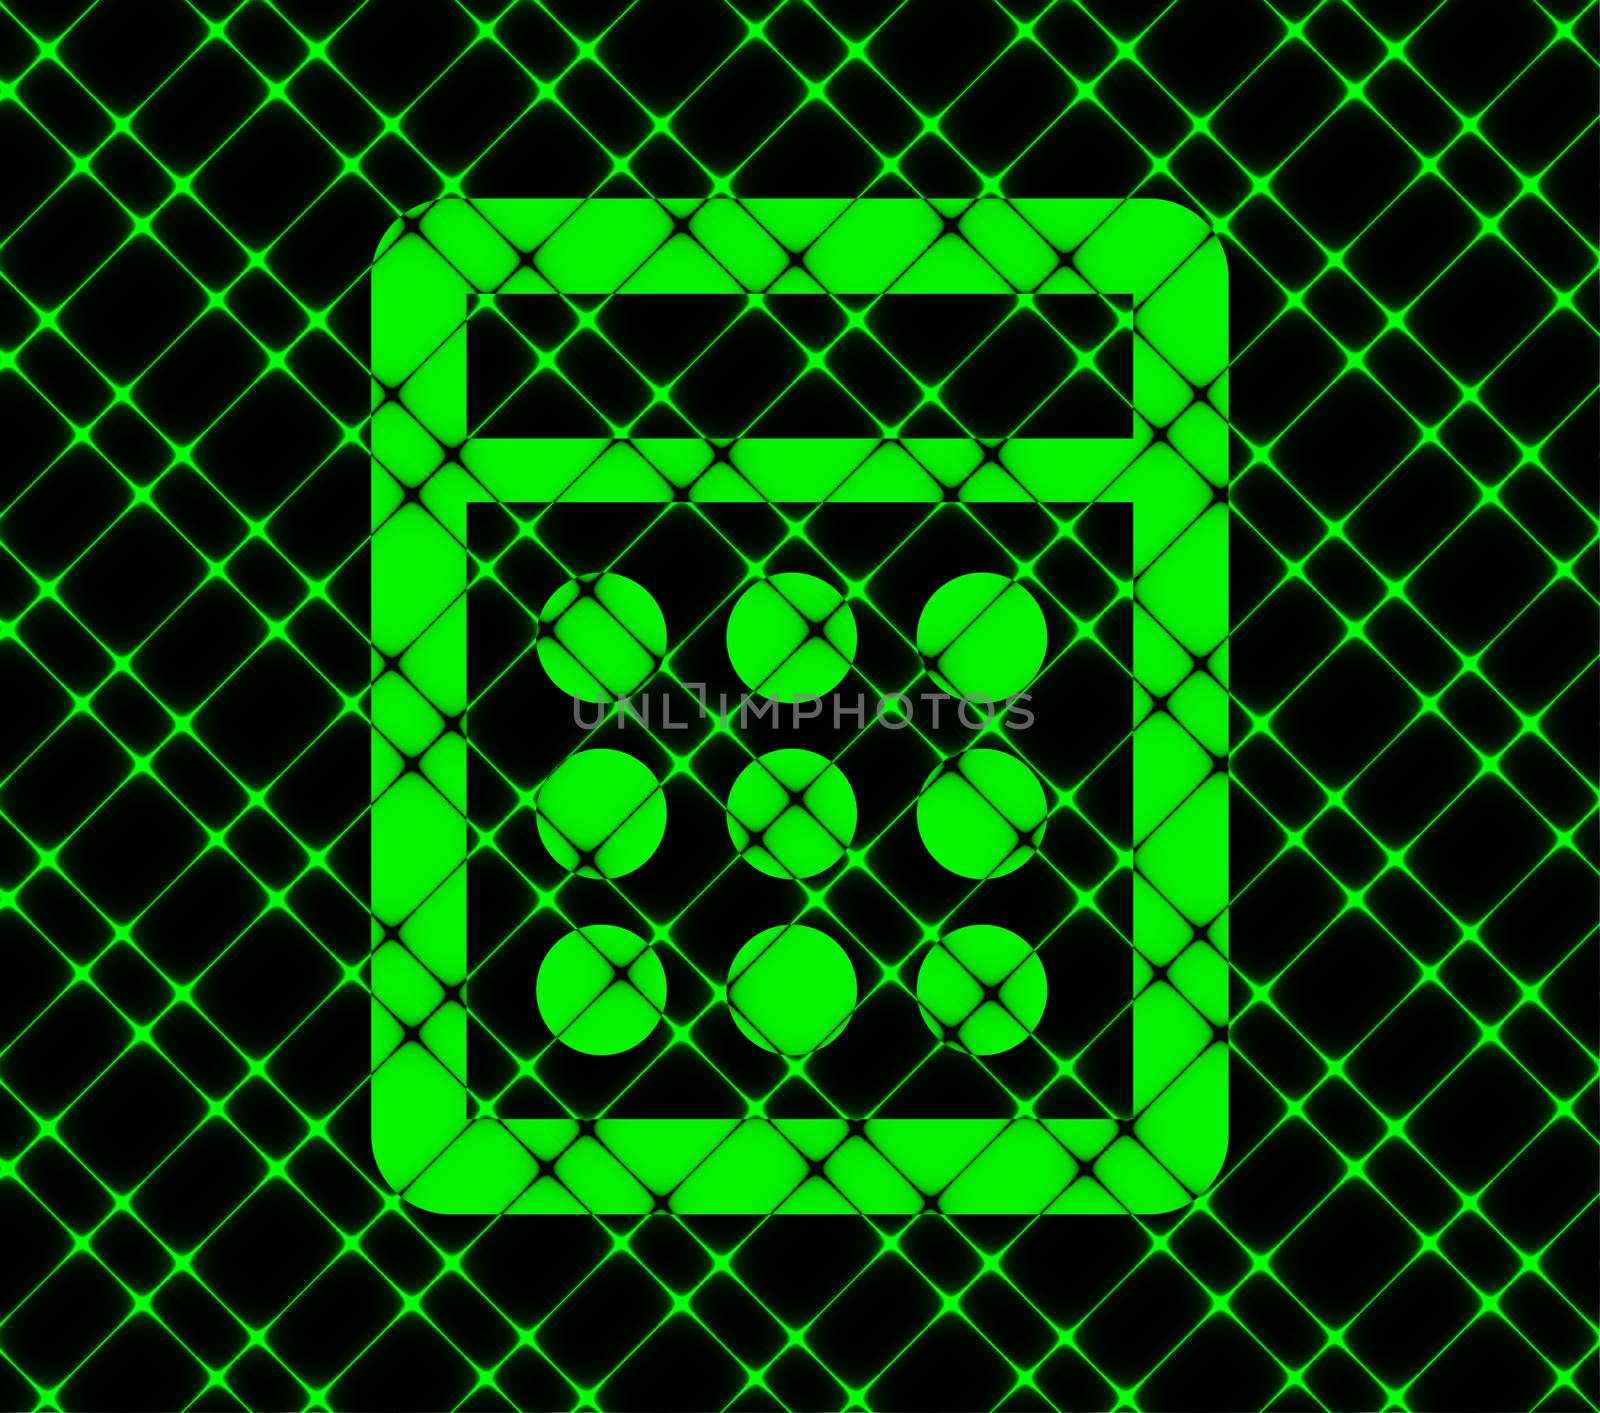 calculator icon flat design with abstract background.